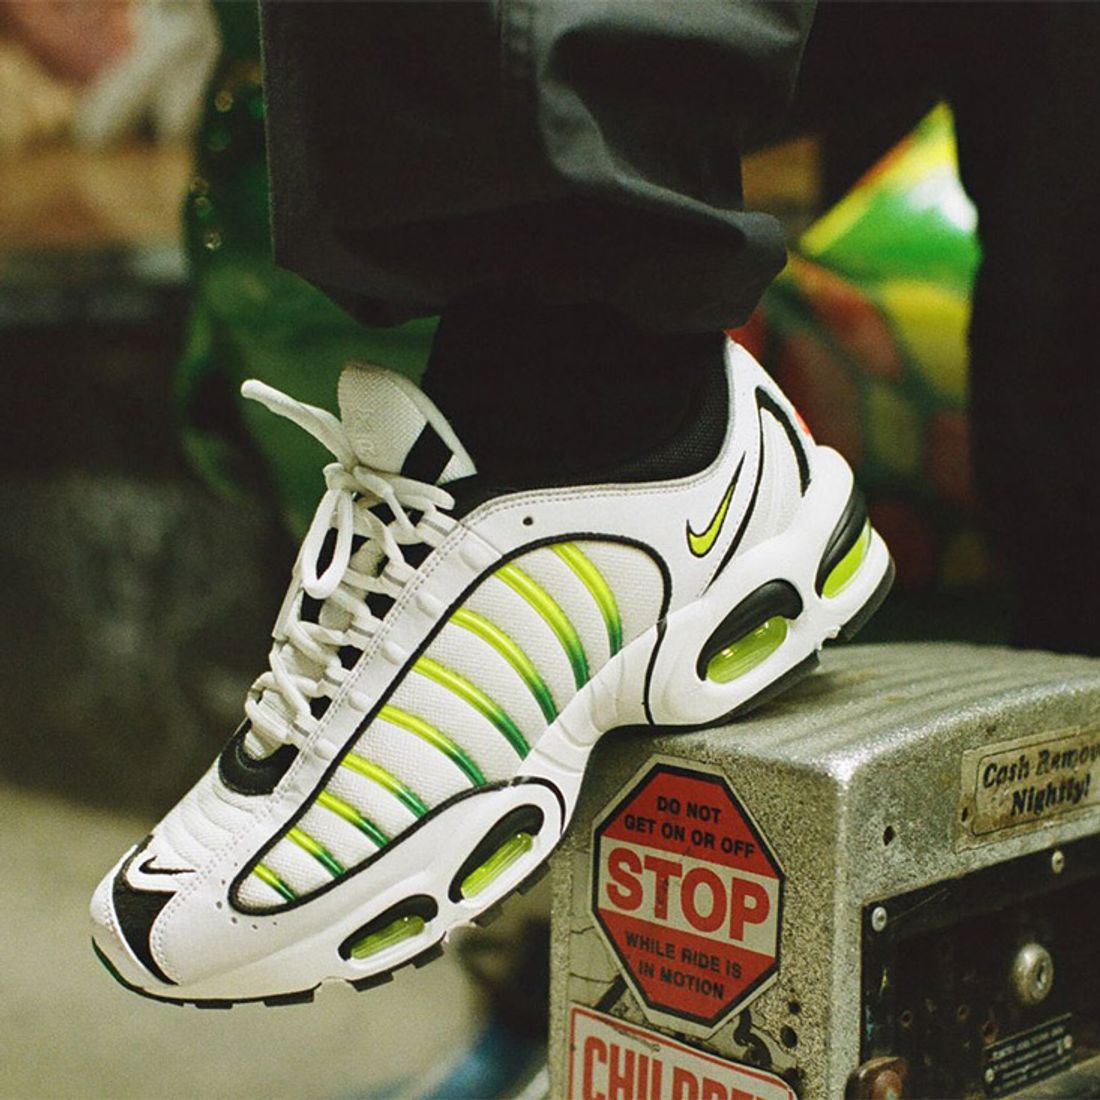 falso Mal medallista A Brief History of the OG Nike Air Max Tailwind Series - Sneaker Freaker